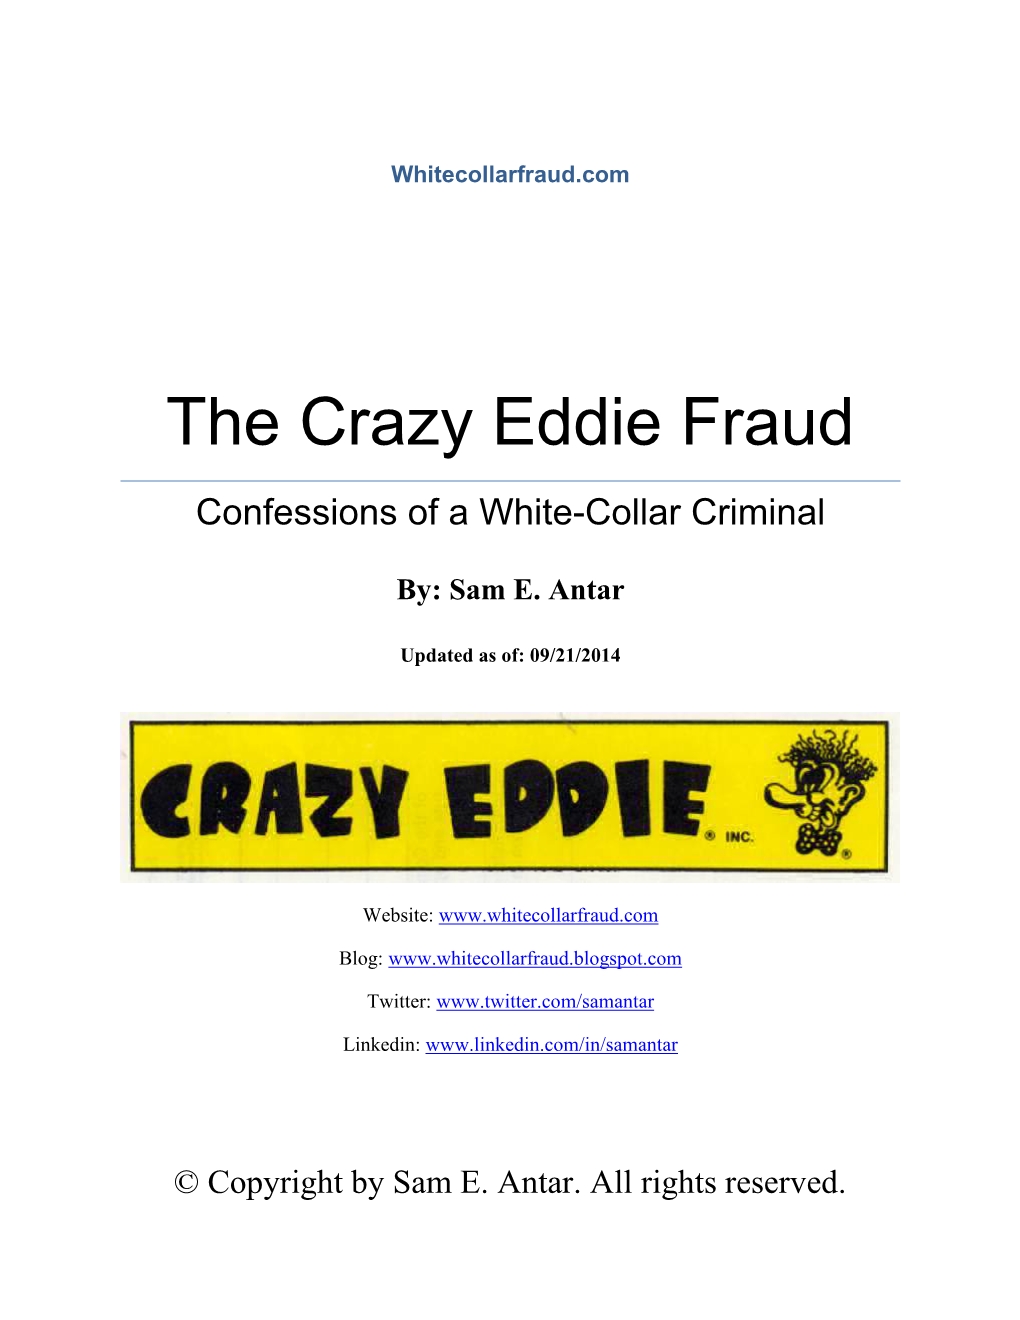 The Crazy Eddie Fraud Confessions of a White-Collar Criminal